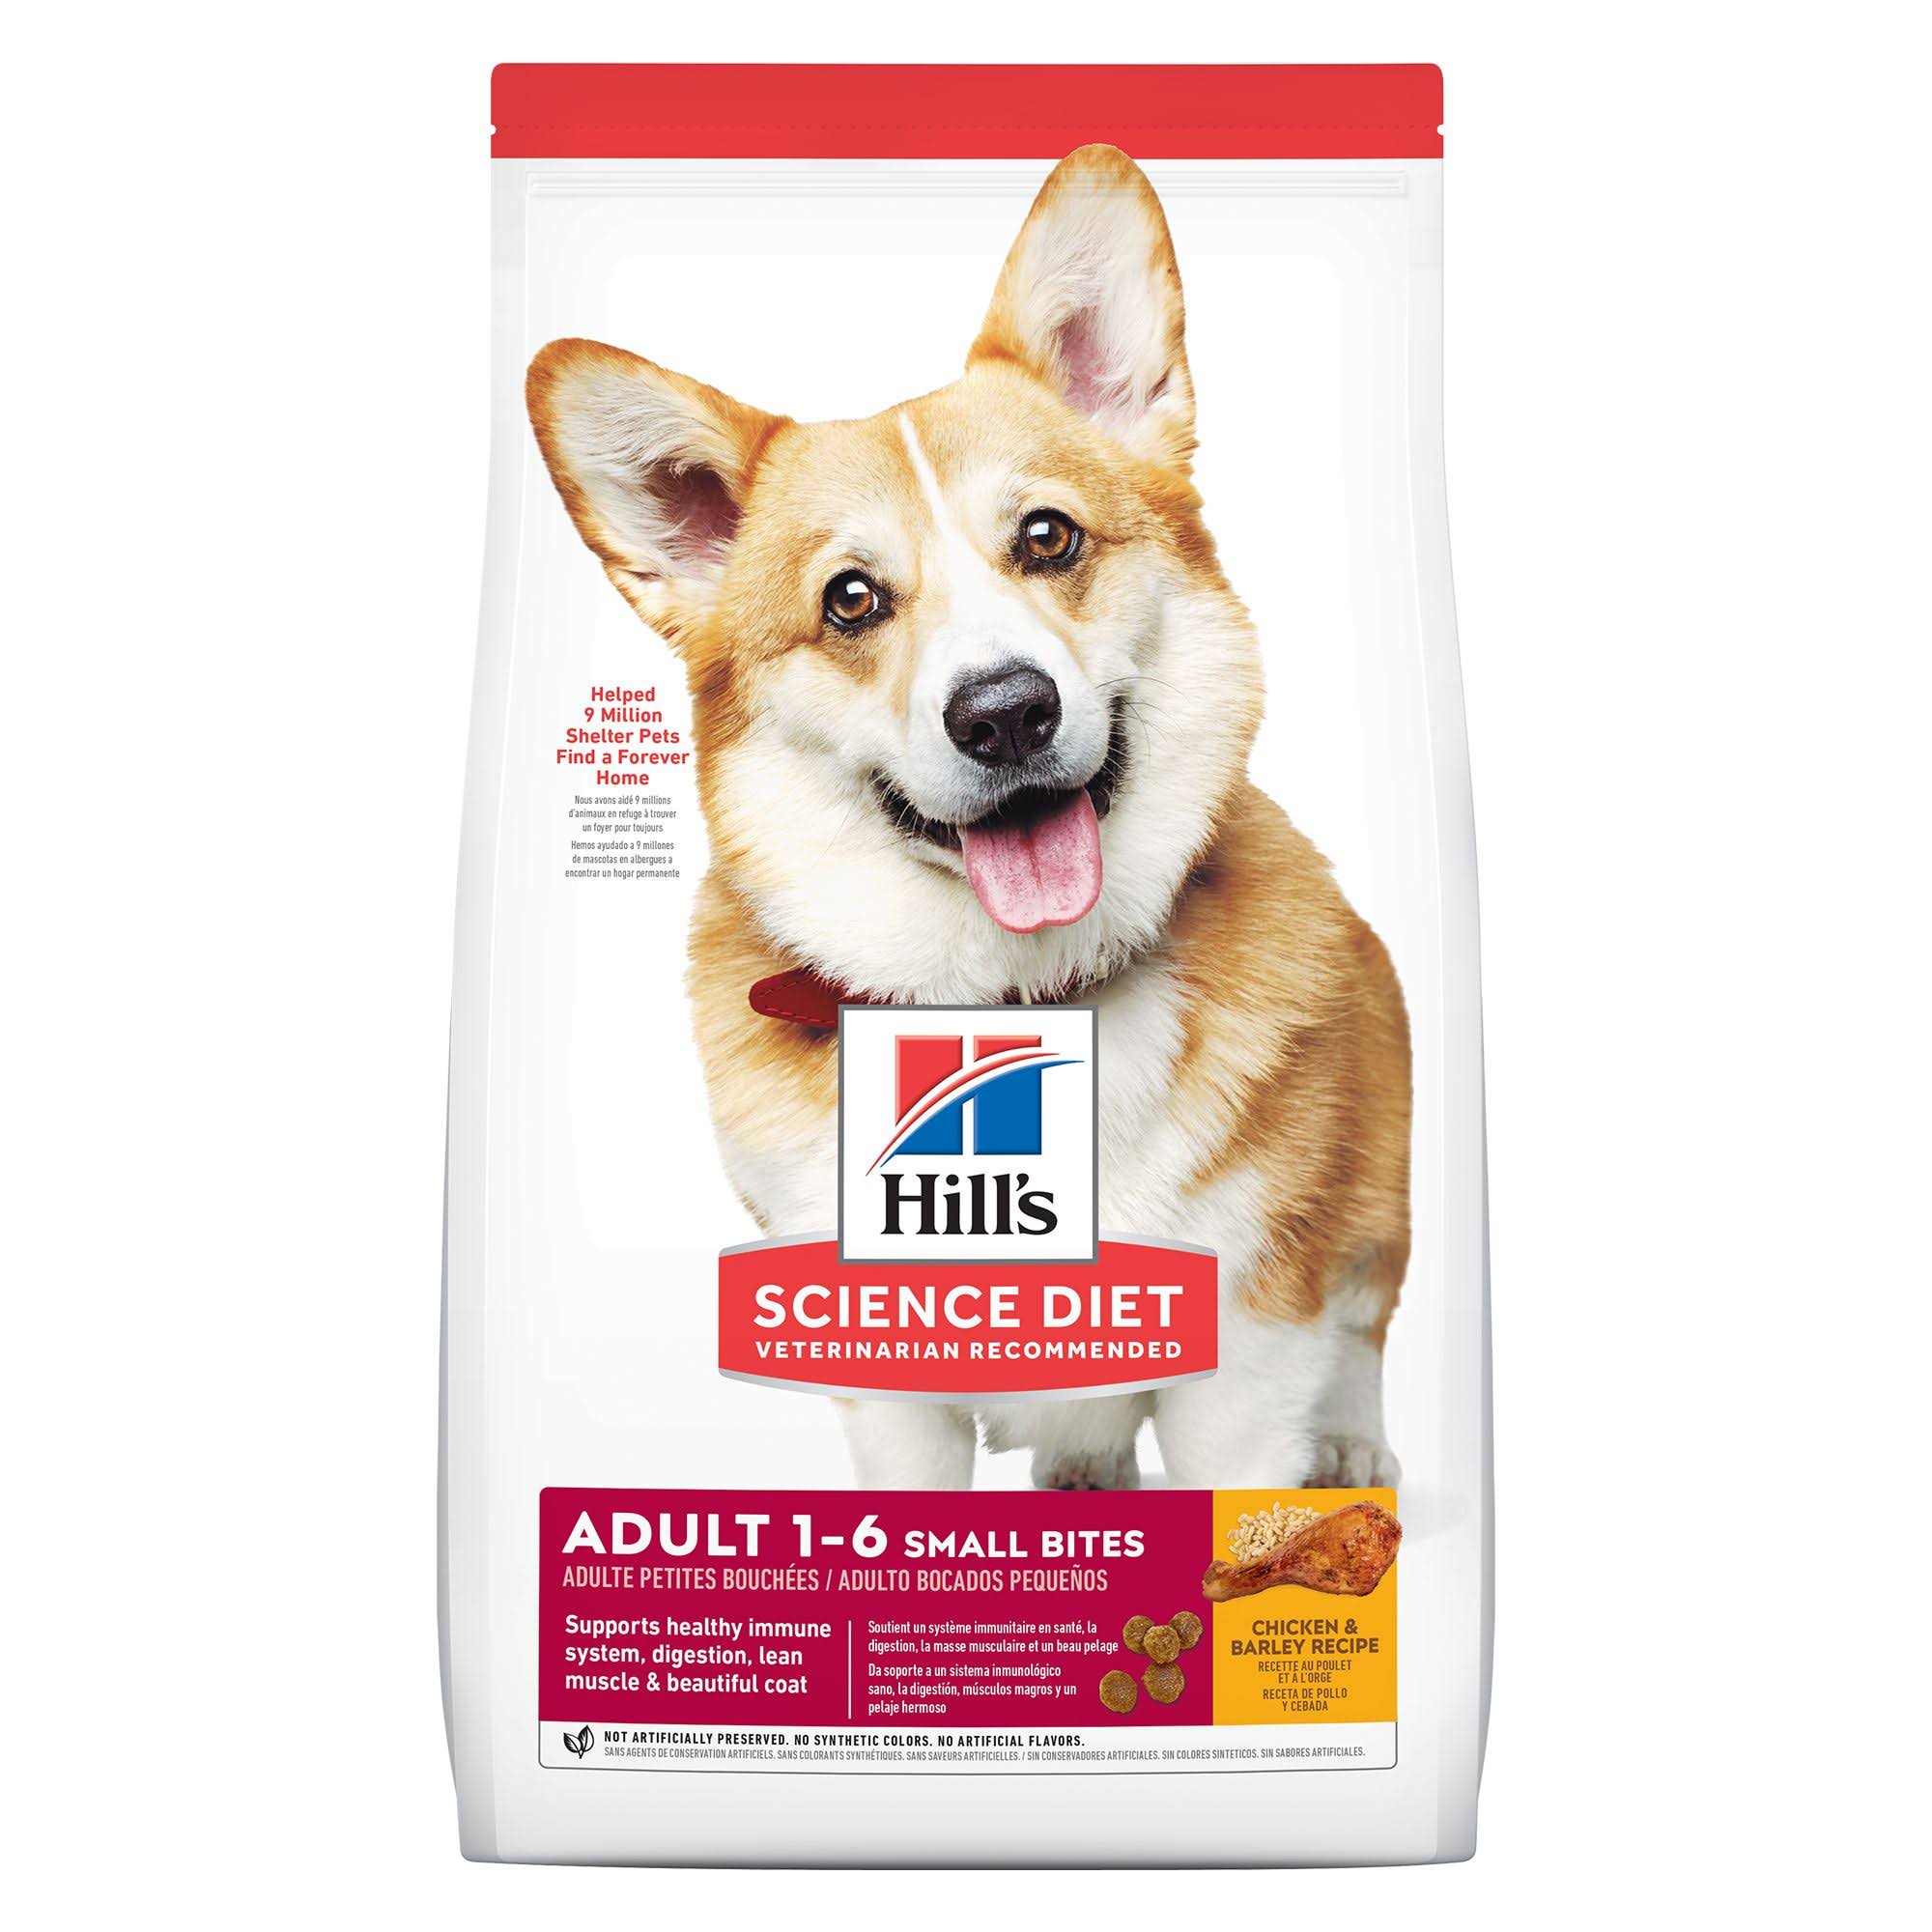 Hill's Science Diet Adult 1-6 Small Bites Chicken & Barley Recipe Premium Natural Dog Food